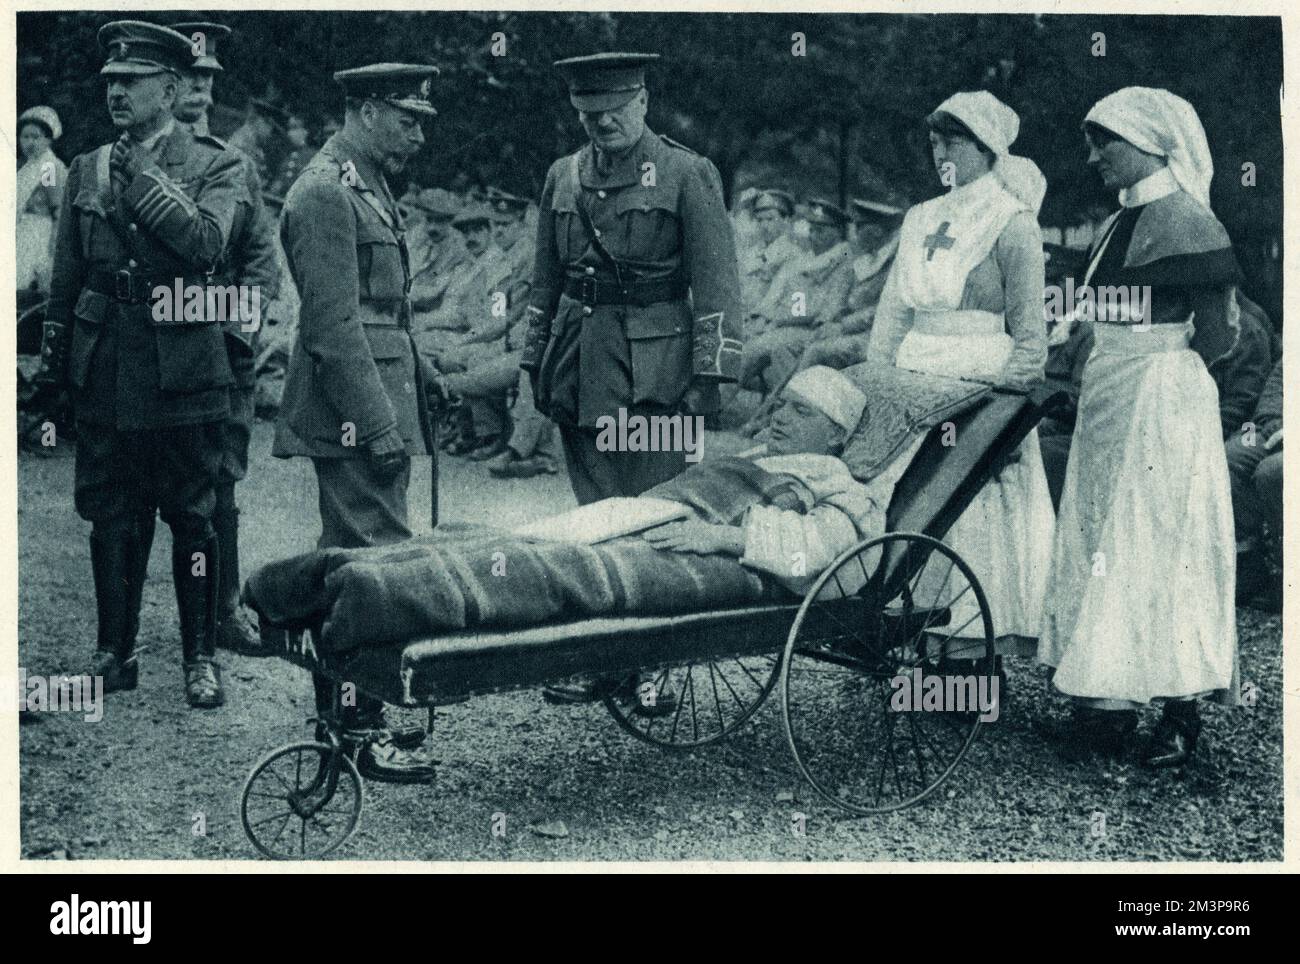 King George V accompanied with Queen Mary and Princess Mary visting the Royal Victoria Military Hospital at Netley, near Southampton in Hampshire. George V conversing with one of the wounded soldiers of World War One, in the forecourt.     Date: 30 July 1917 Stock Photo